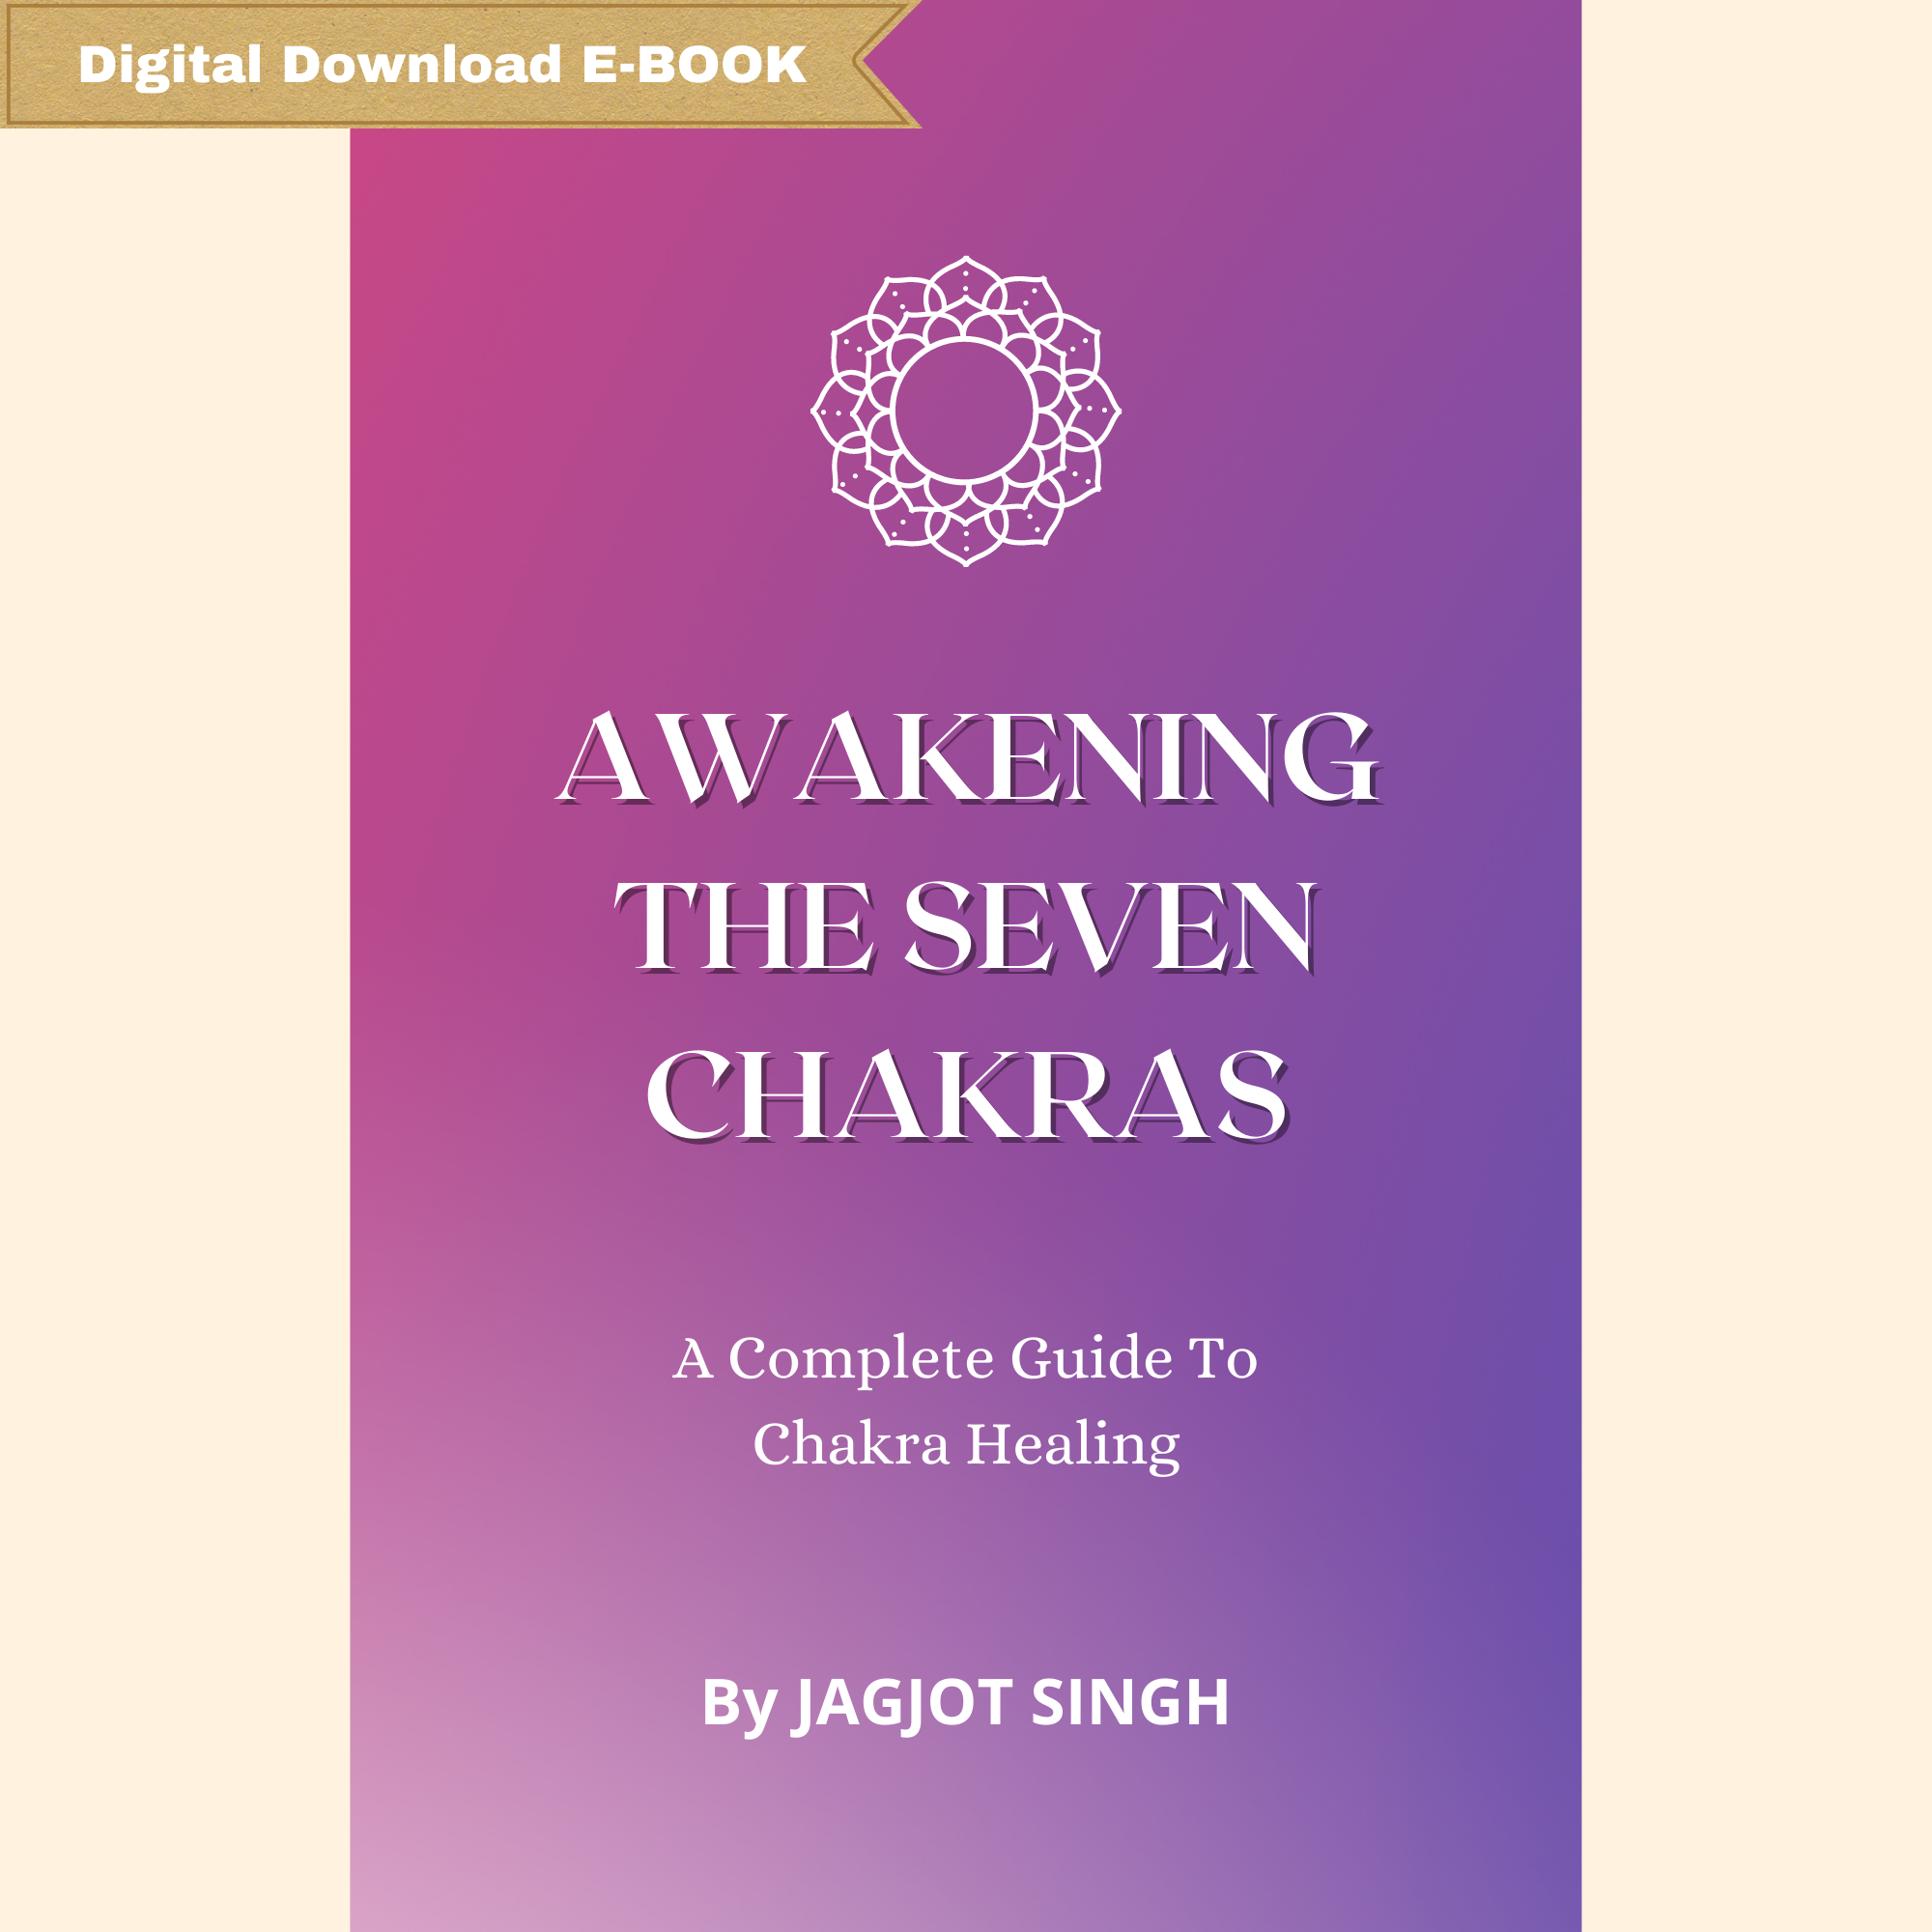 A Complete Guide To Chakra Healing